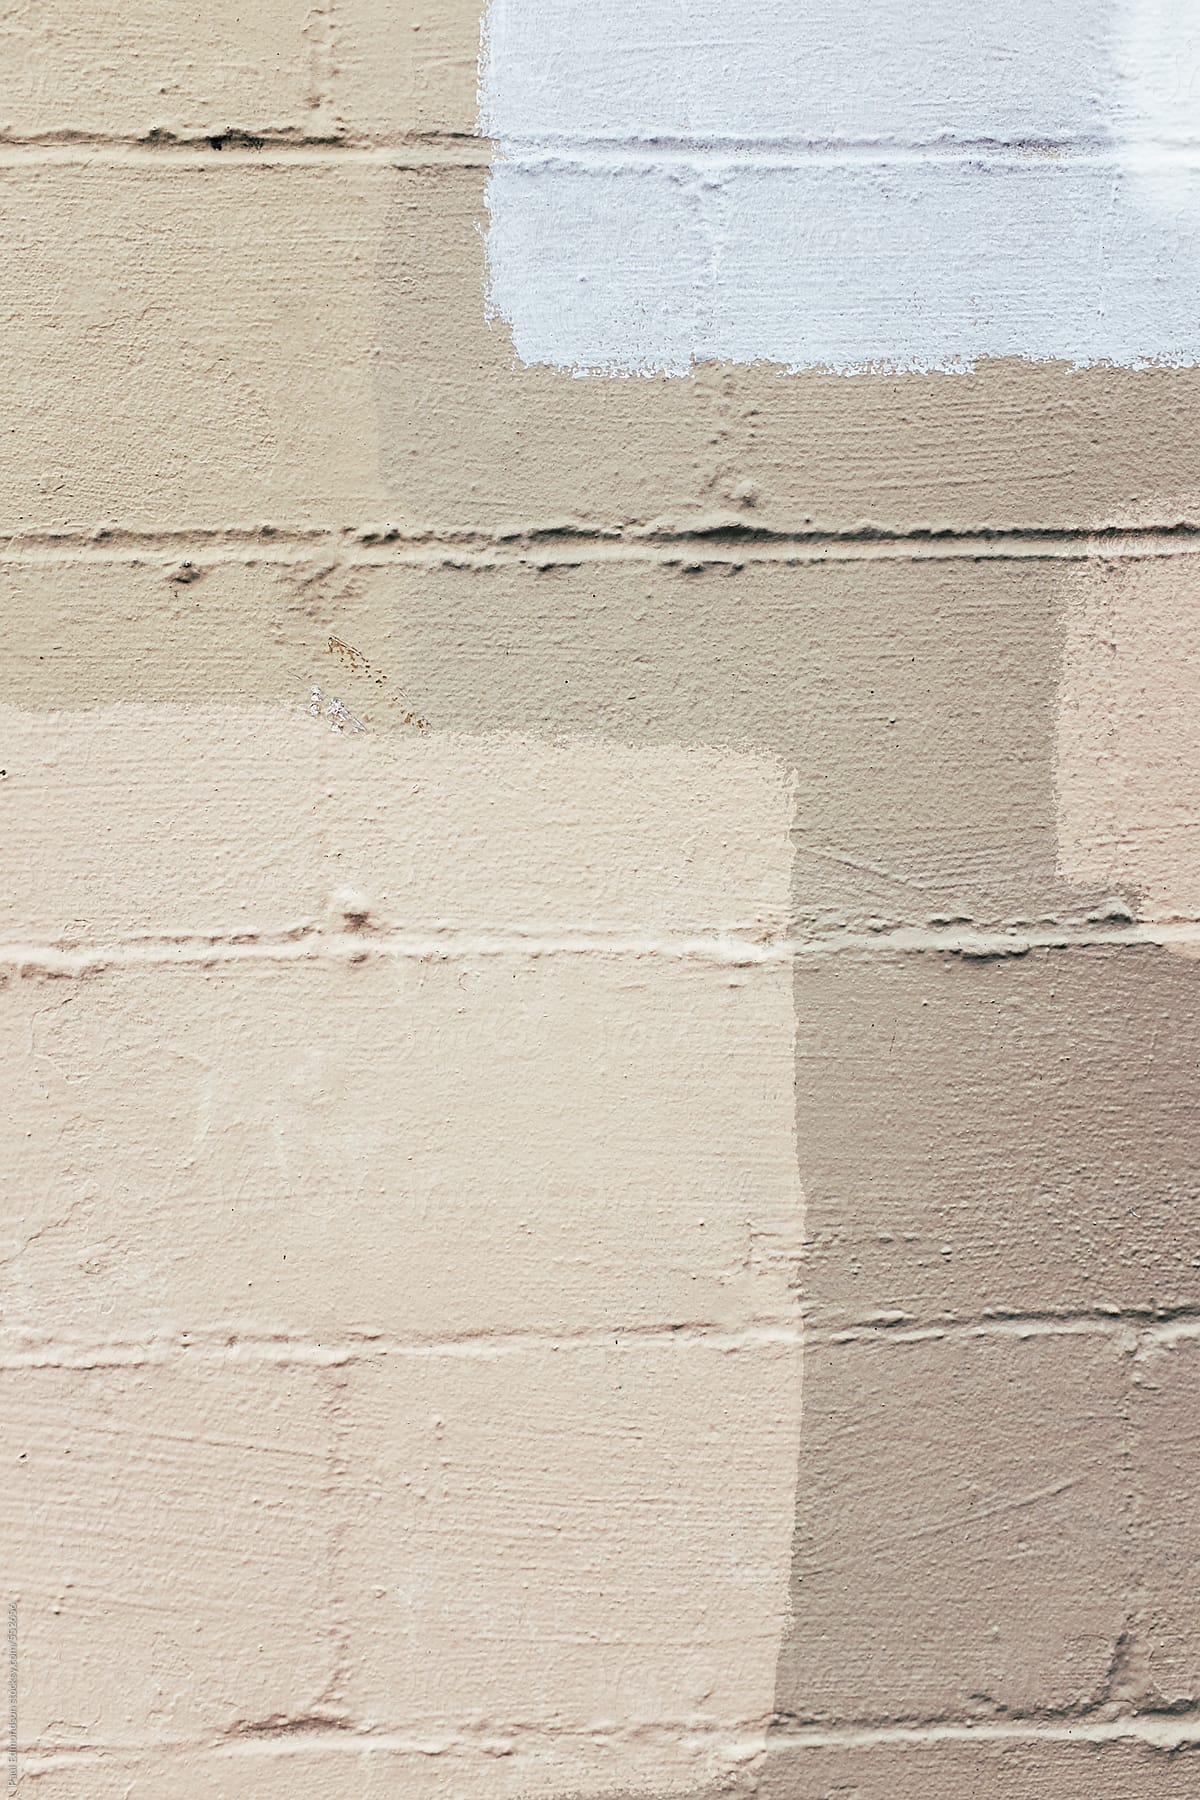 Close up of brown and grey paint covering graffiti tags on brick wall